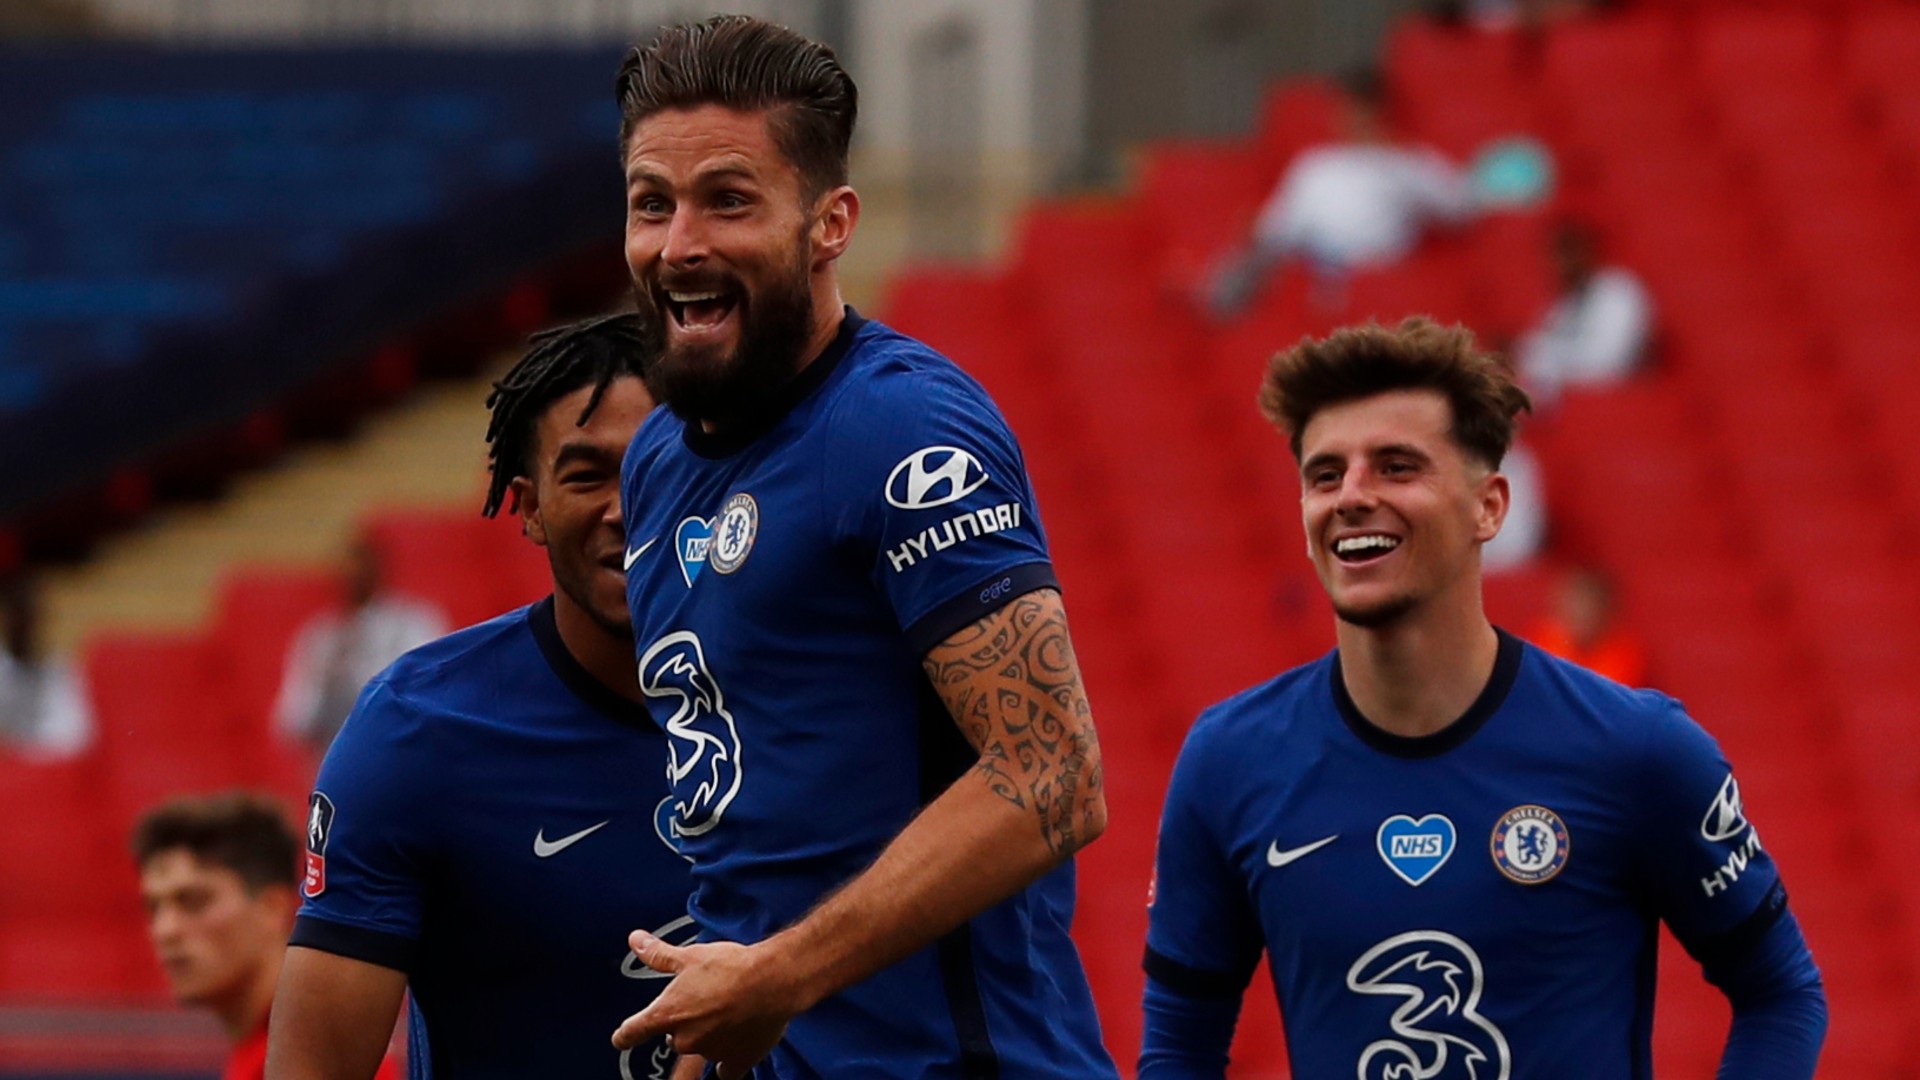 'Werner isn't the same as me' - Giroud relishing Chelsea competition as he targets the top